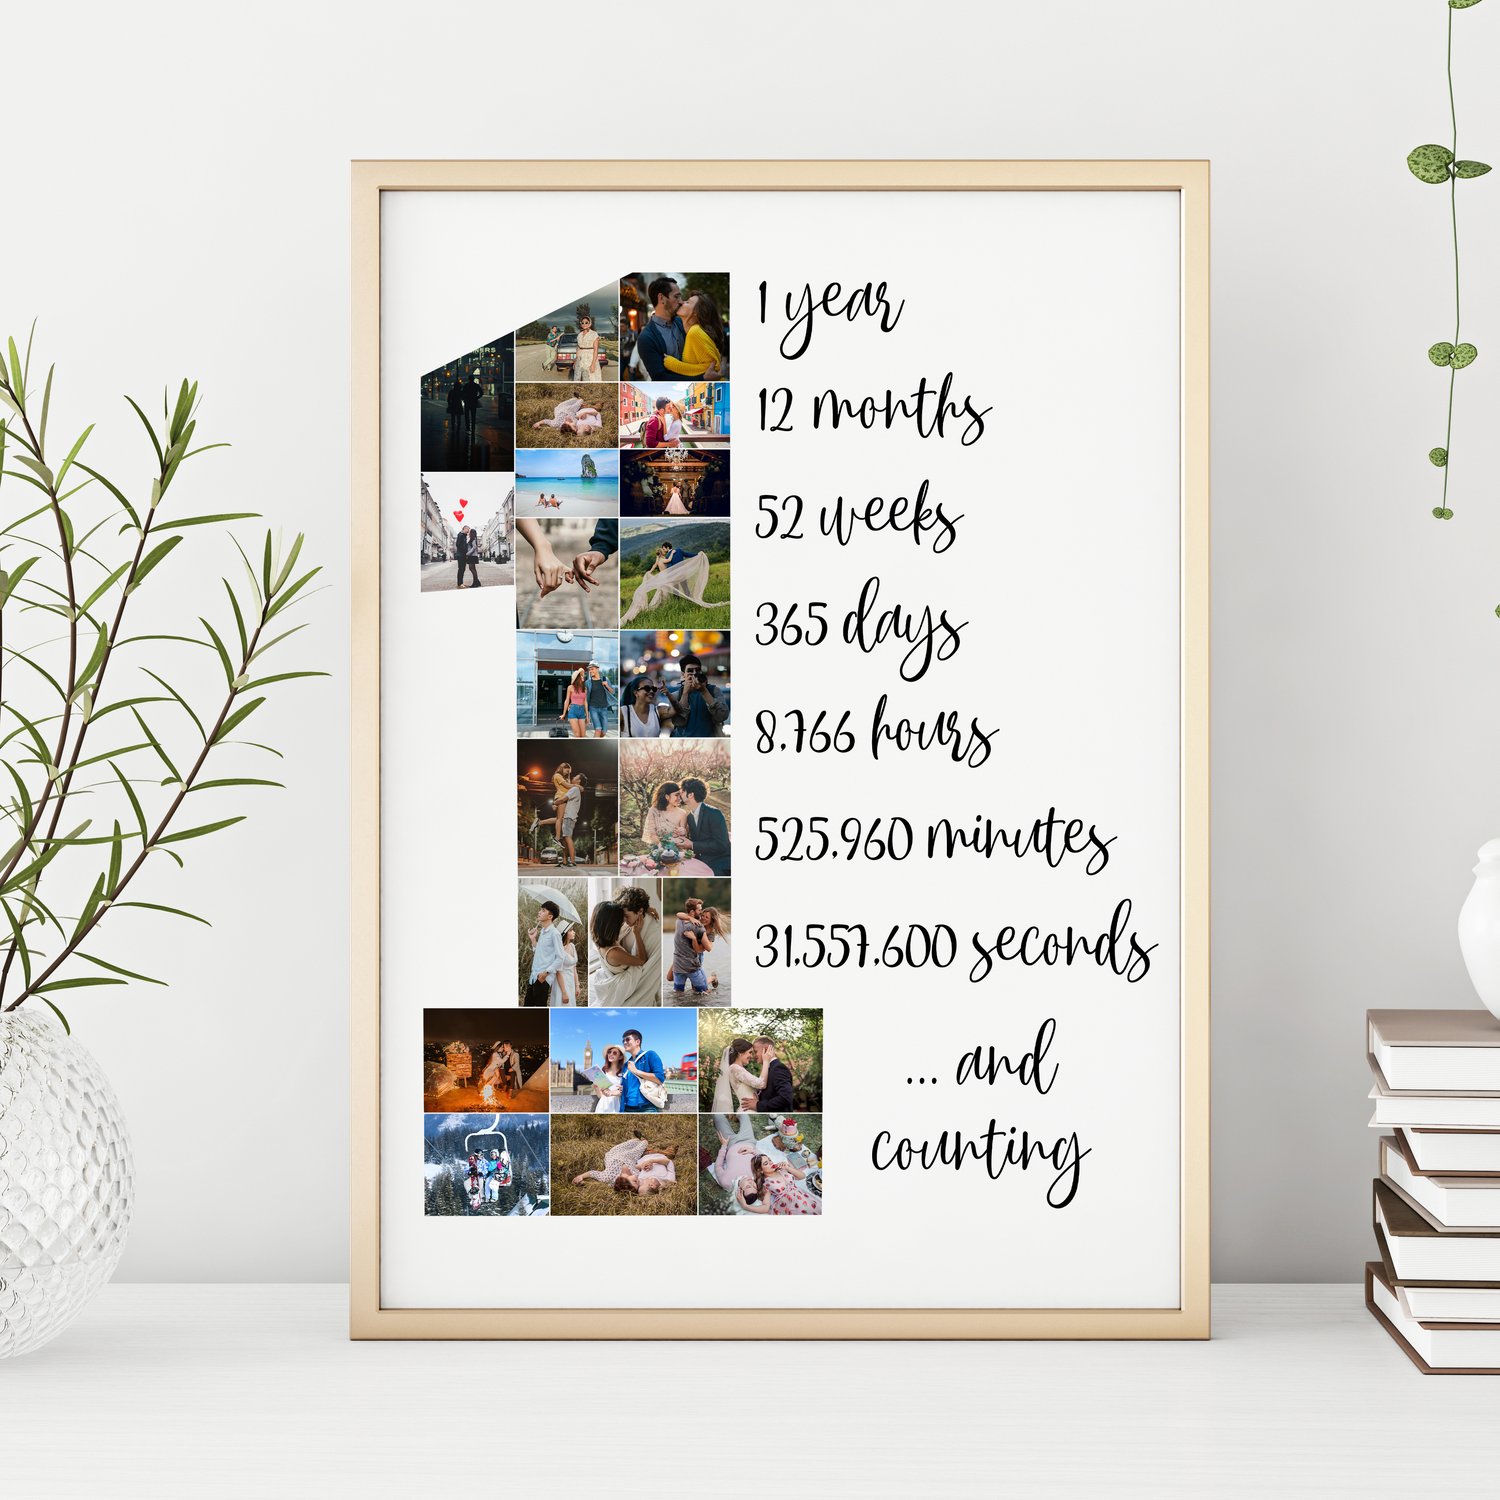 Personalized Picture Frames 1st 1 Year Anniversary Gift For Boyfriend  Girlfriend